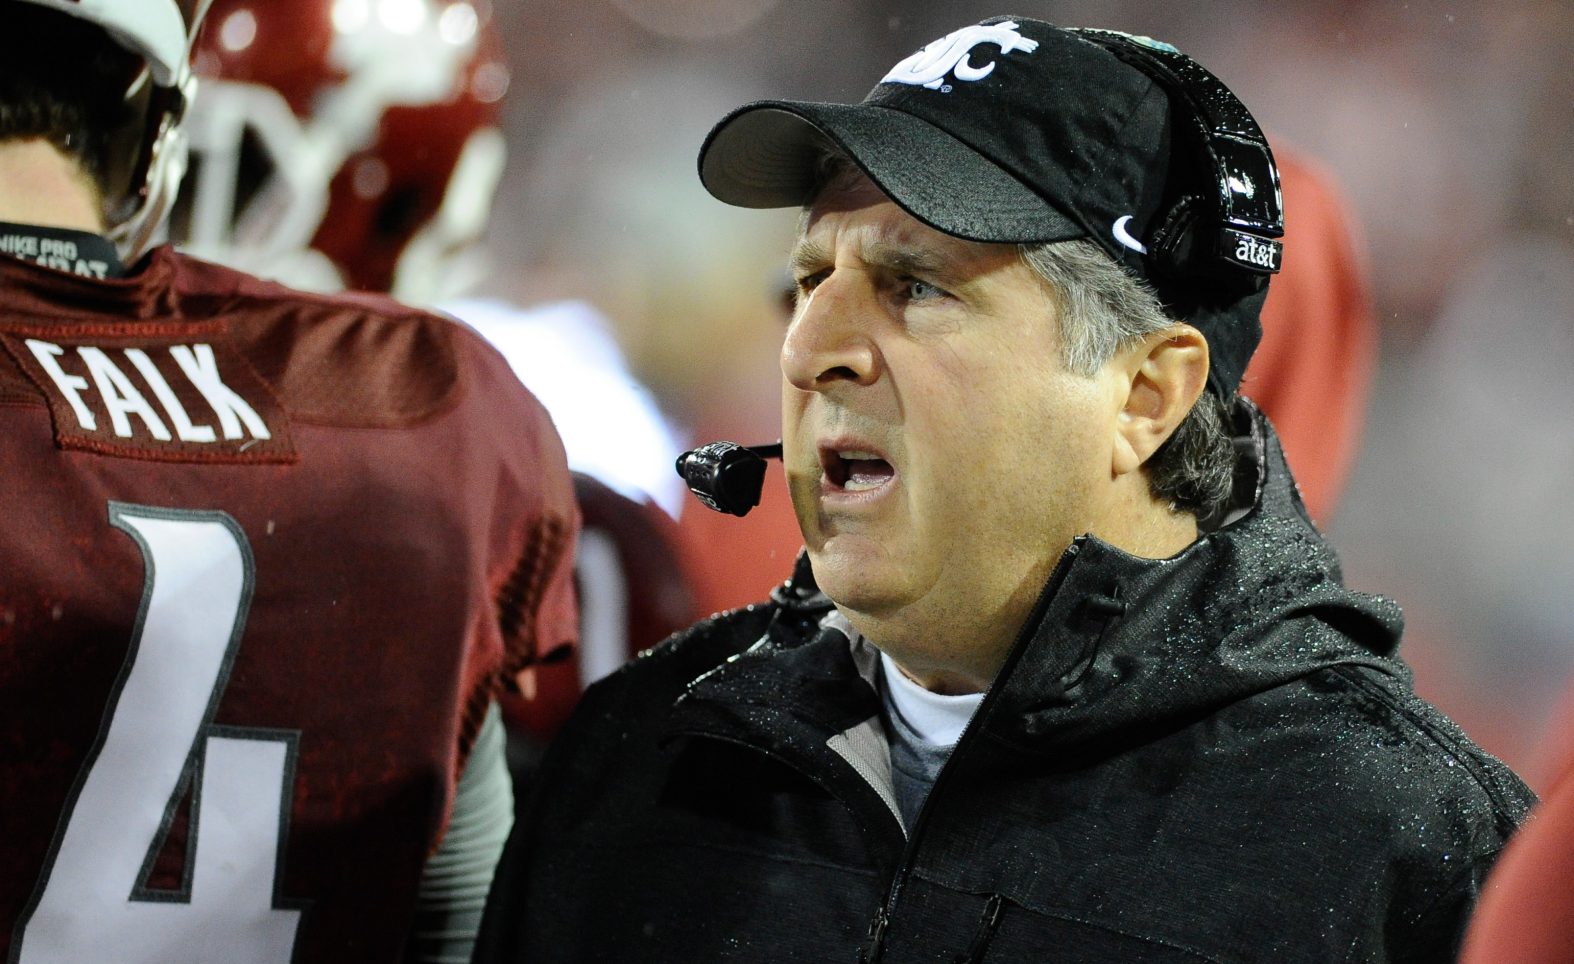 CW interviews Dan McCarney on the passing of Mike Leach